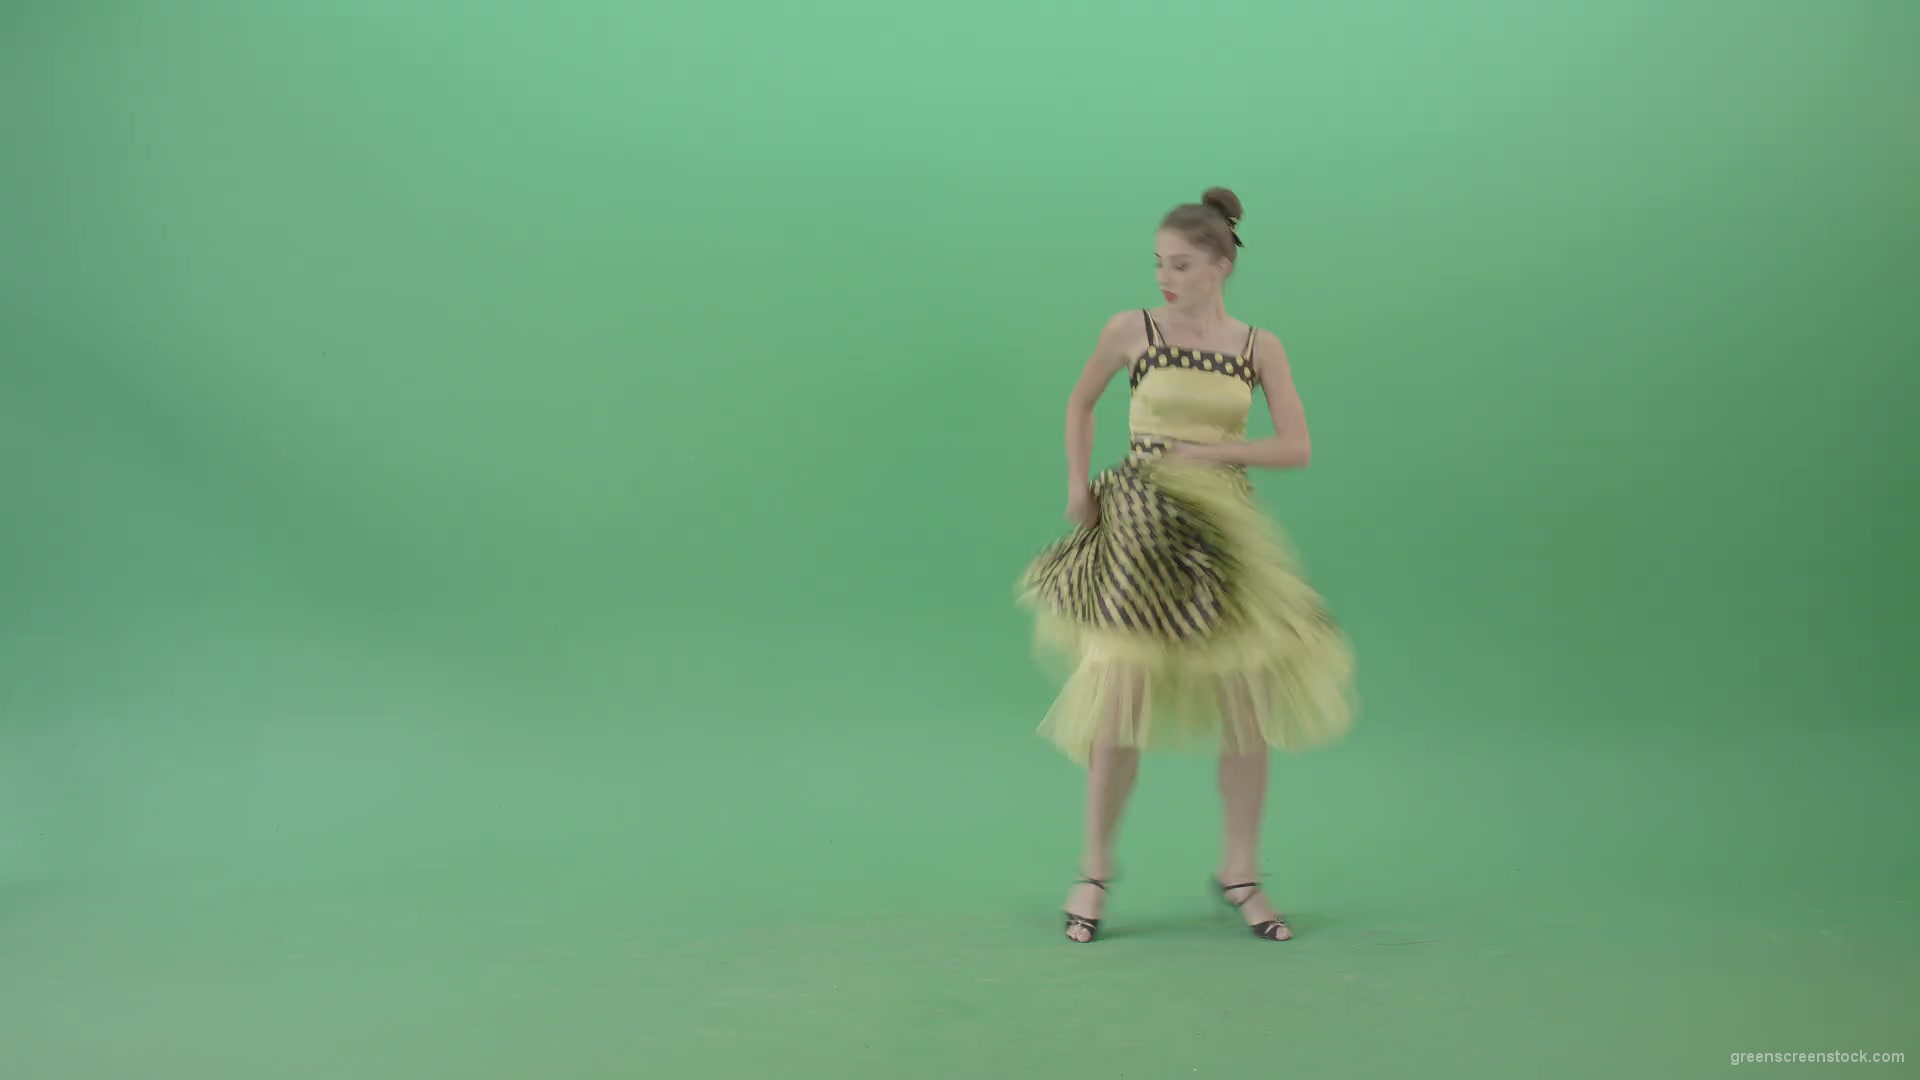 Elegant-Girl-in-Yellow-dress-Dancing-Boogie-woogie-and-chill-on-Green-Screen-4K-Video-Footage-1920_001 Green Screen Stock